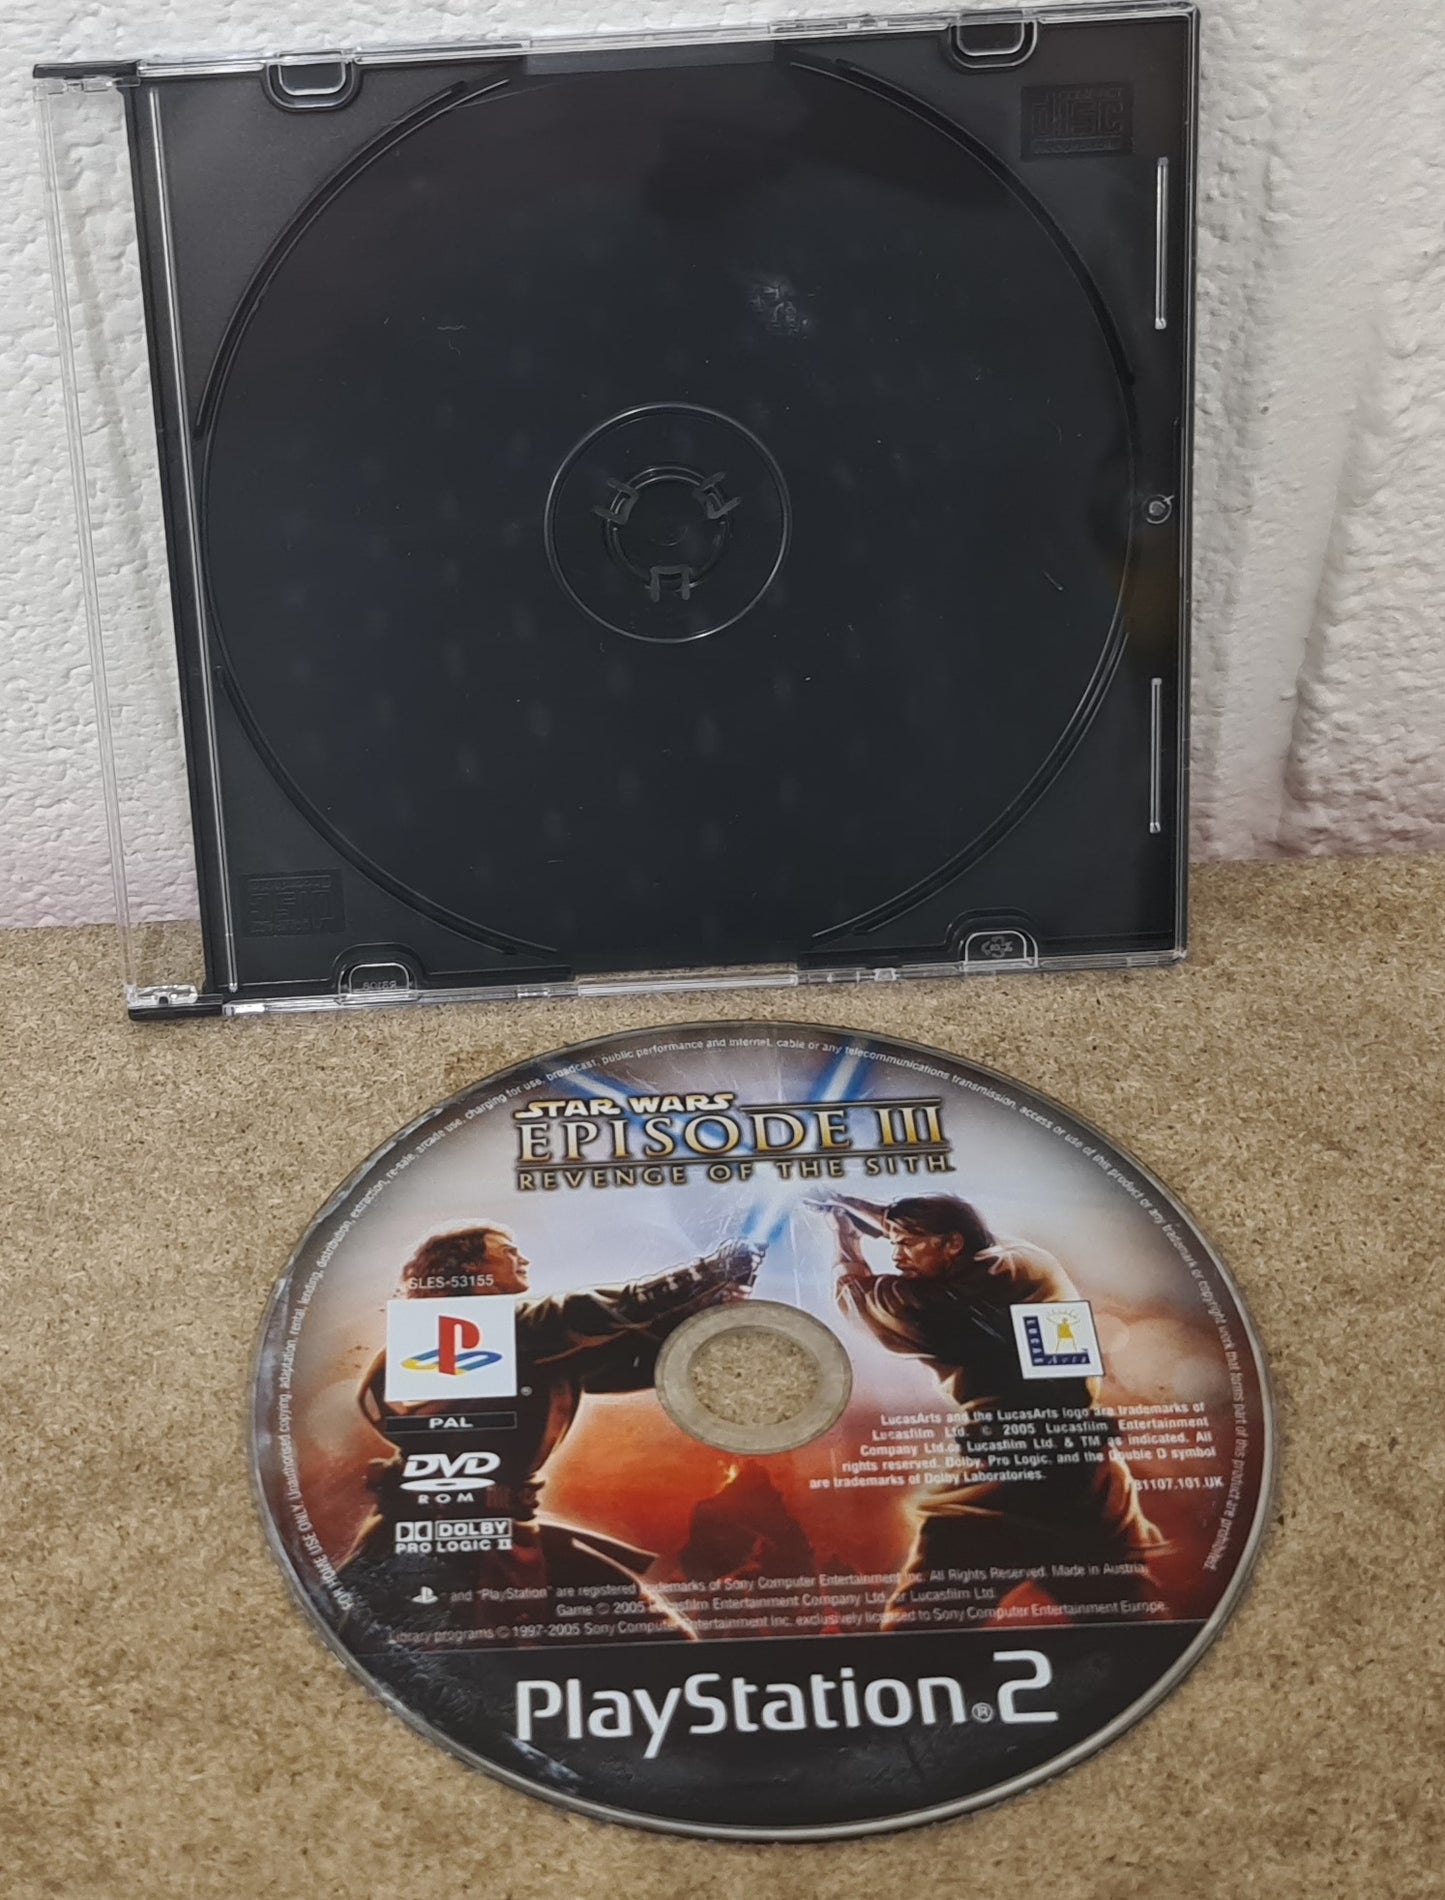 Star Wars Episode III Revenge of the Sith Sony Playstation 2 (PS2) Game Disc Only